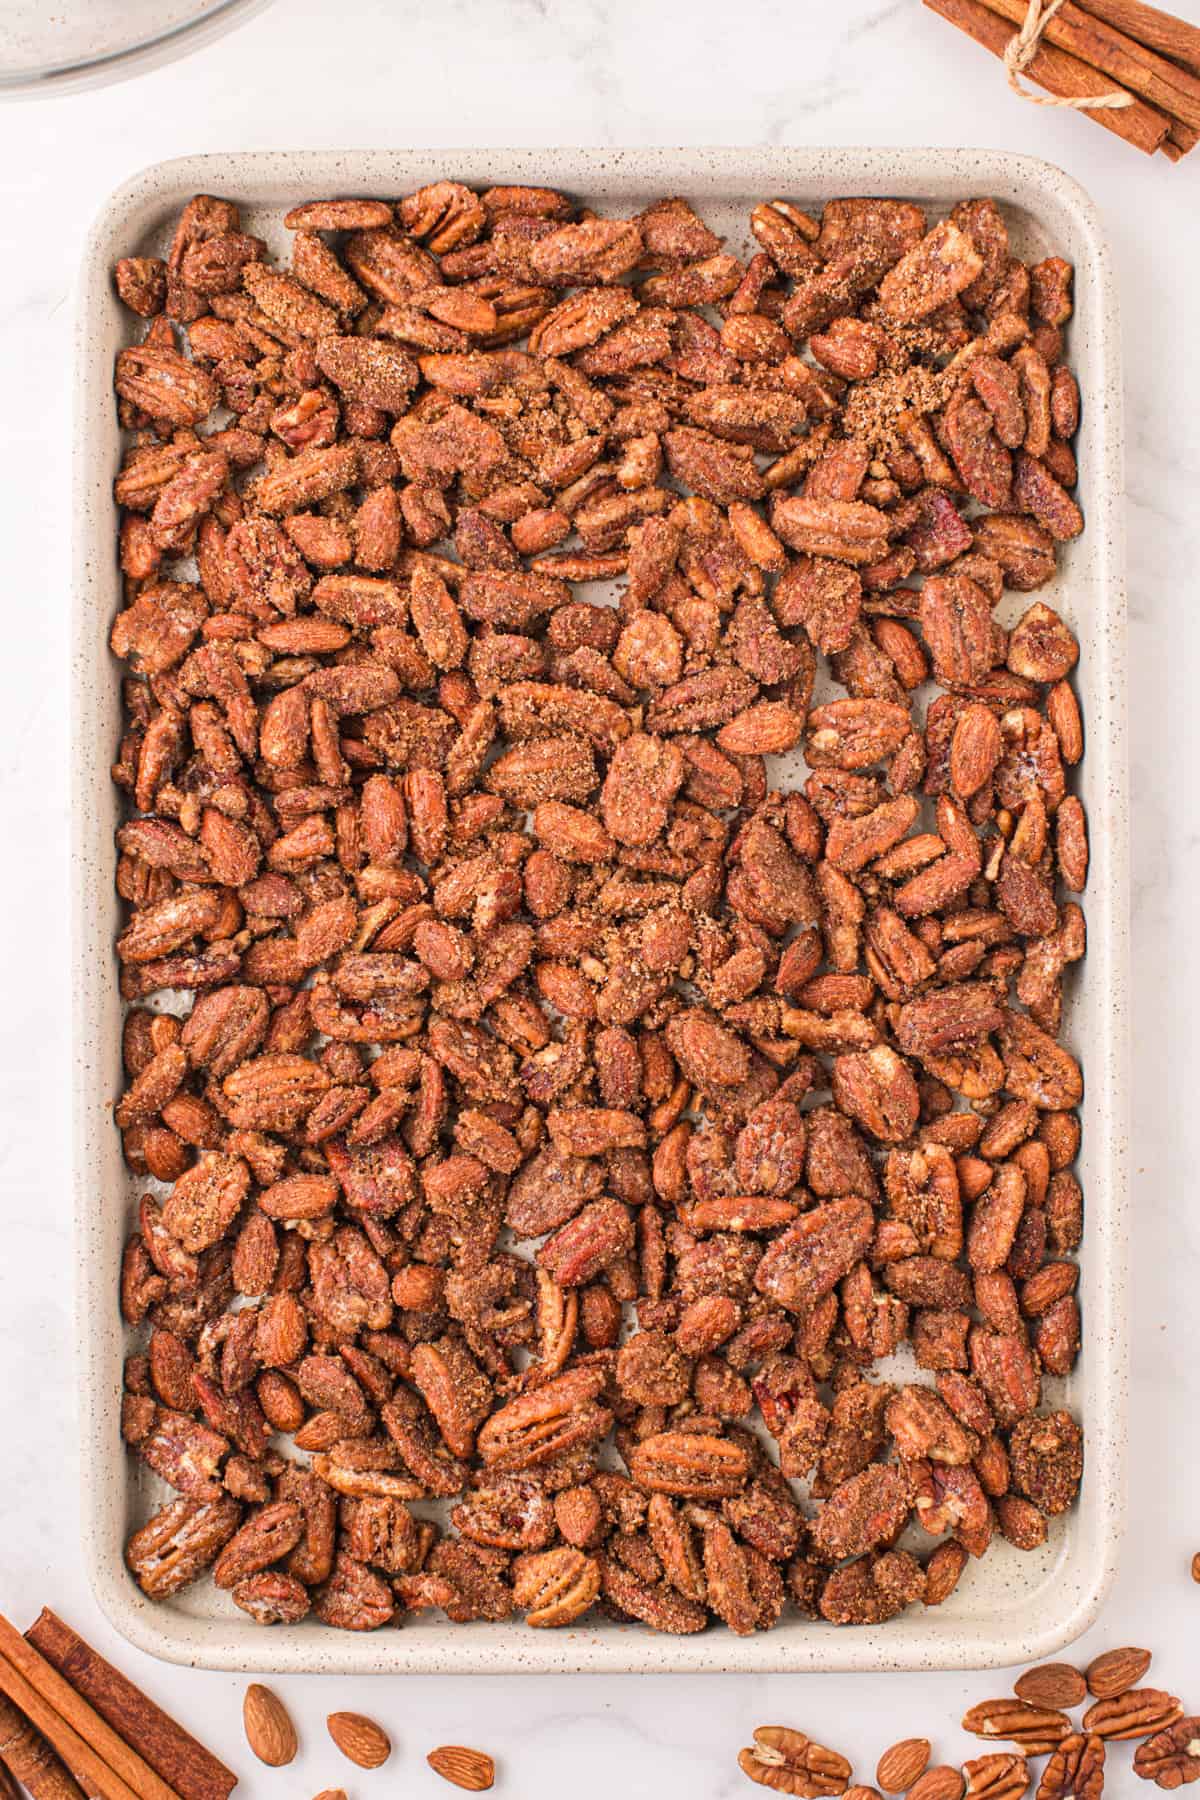 Coated nuts spread in an even layer on baking sheet.